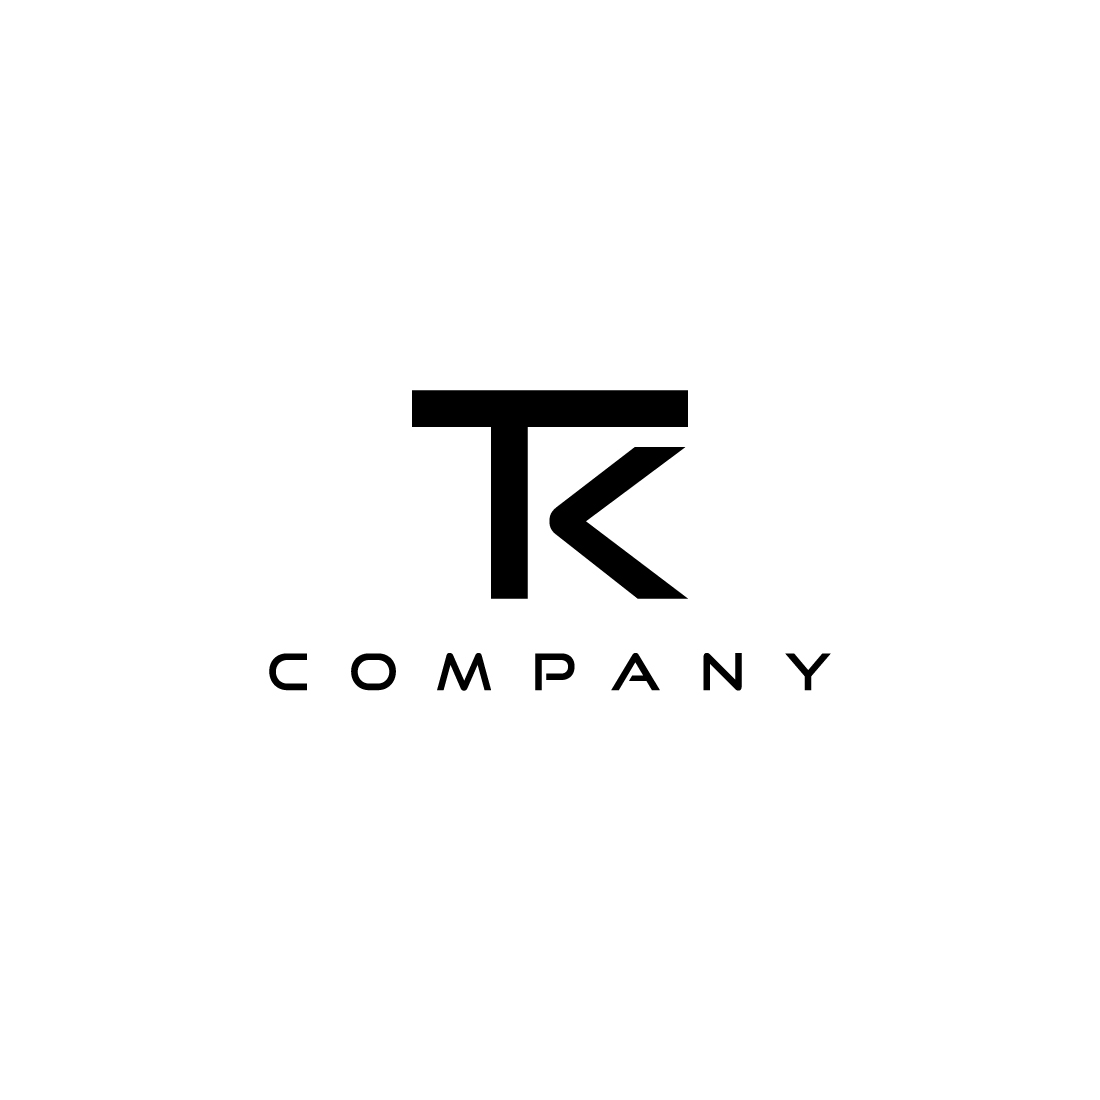 TK letter mark logo with a modern look cover image.